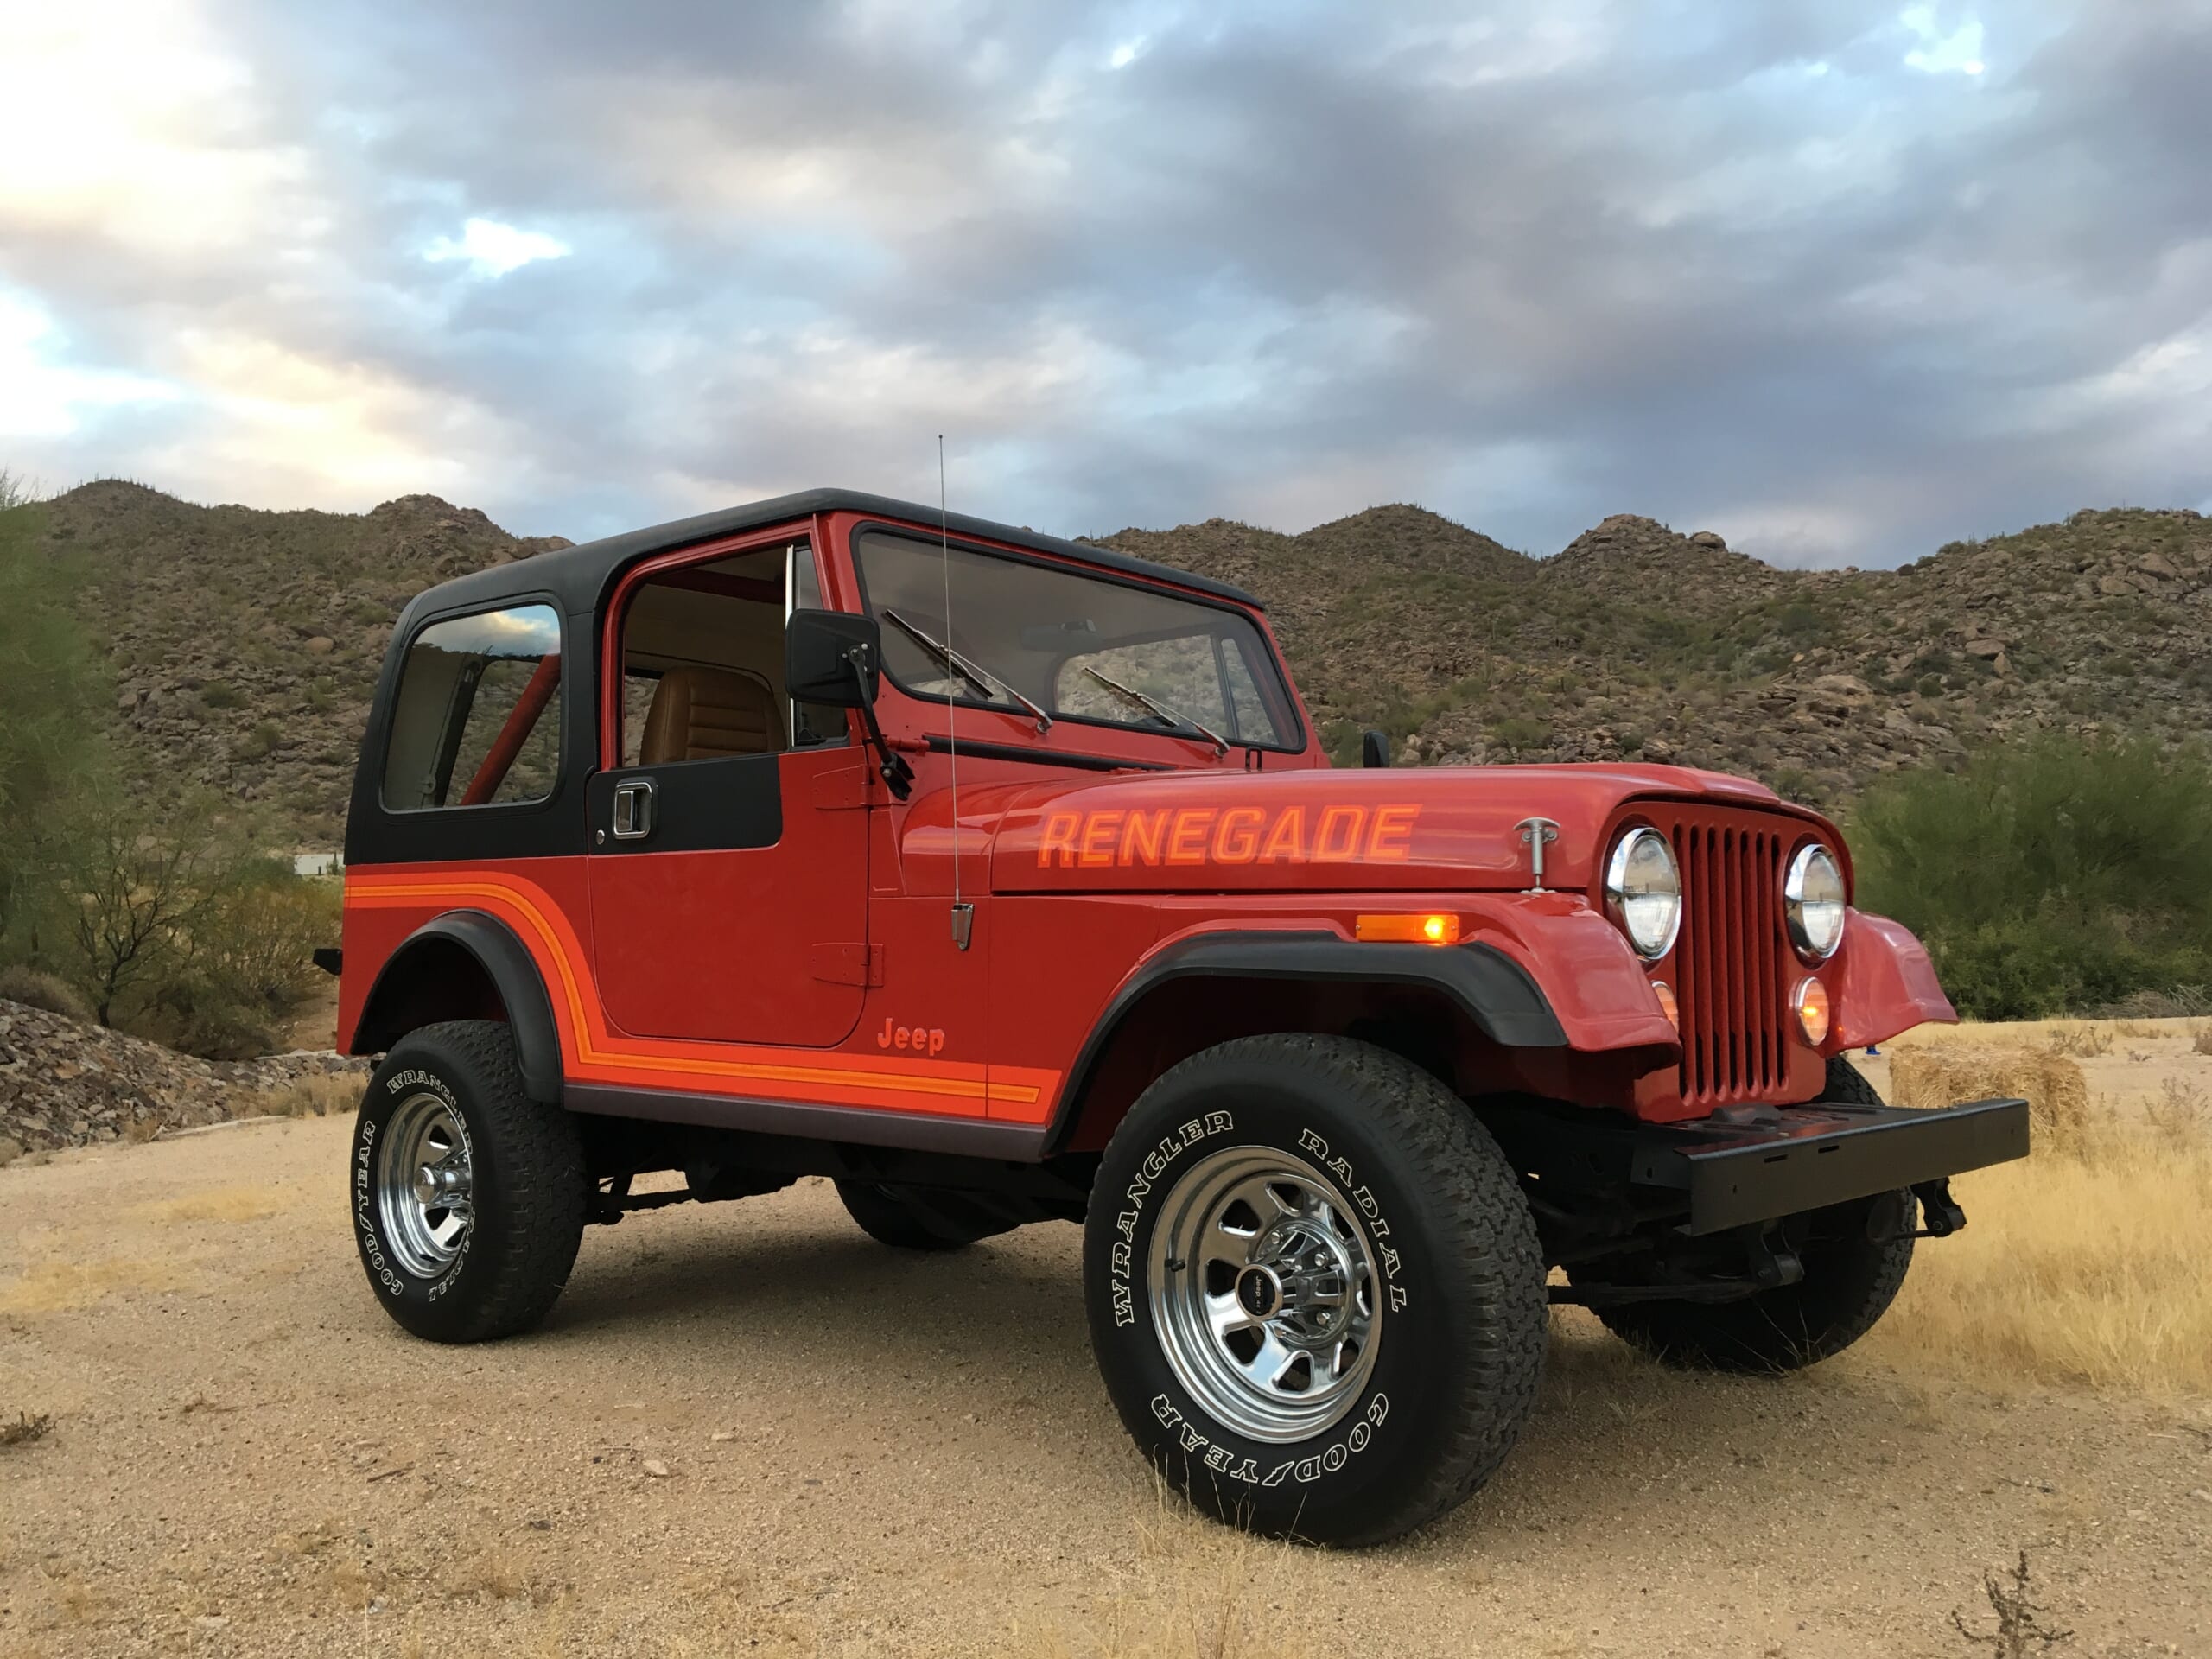 Driving a 1973 Jeep CJ5 on the Rubicon Trail